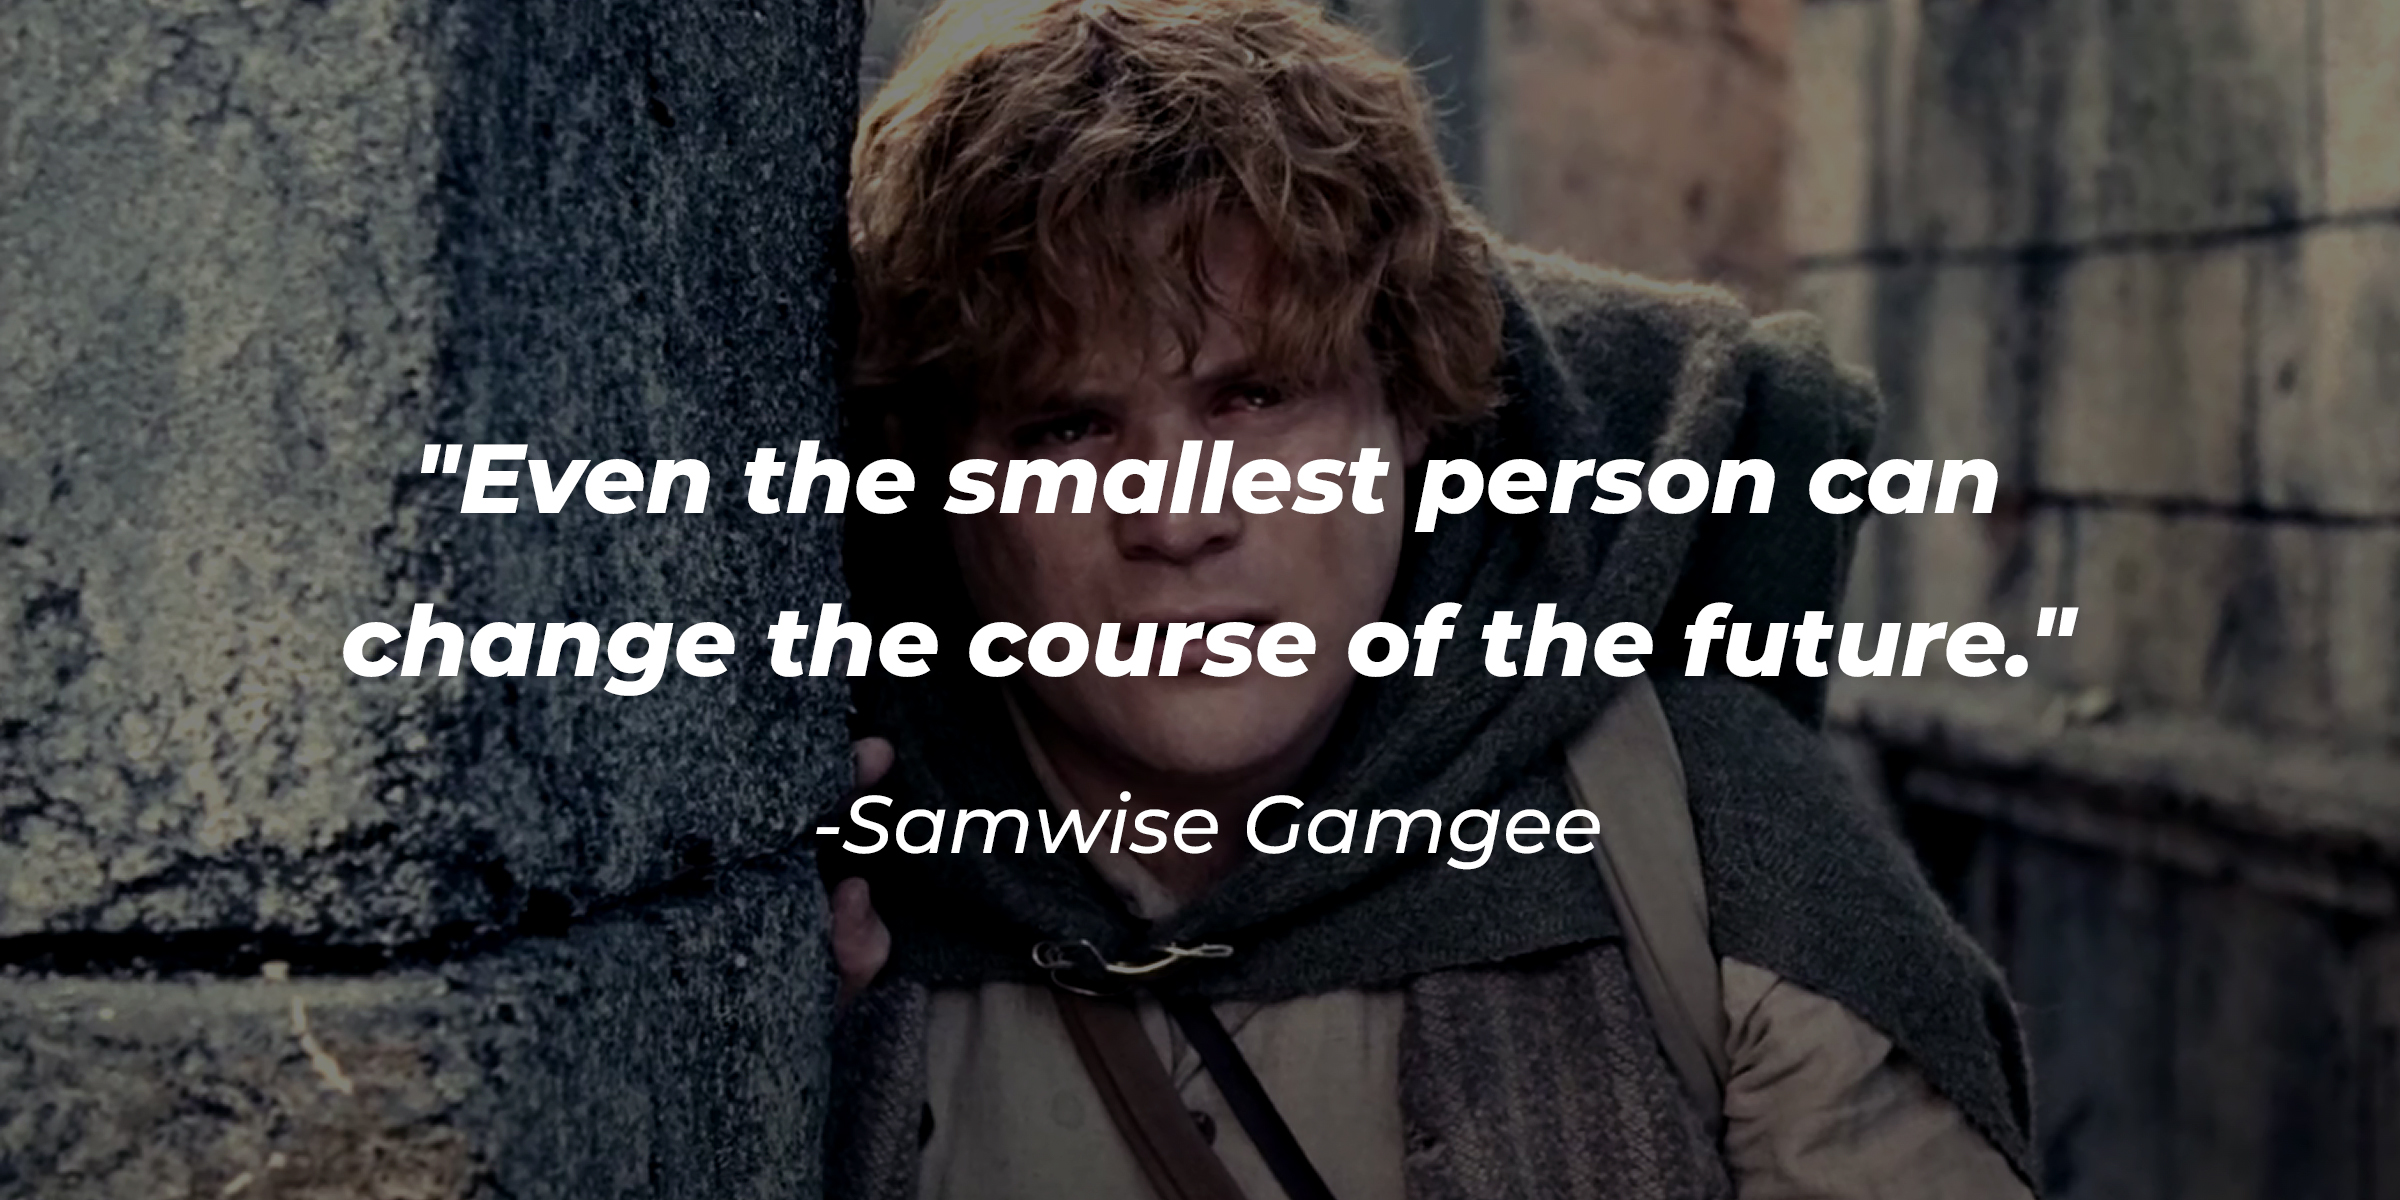 Samwise Gamgee’s quote: “Even the smallest person can change the course of the future.” | Source: Facebook.com/lordoftheringstrilo